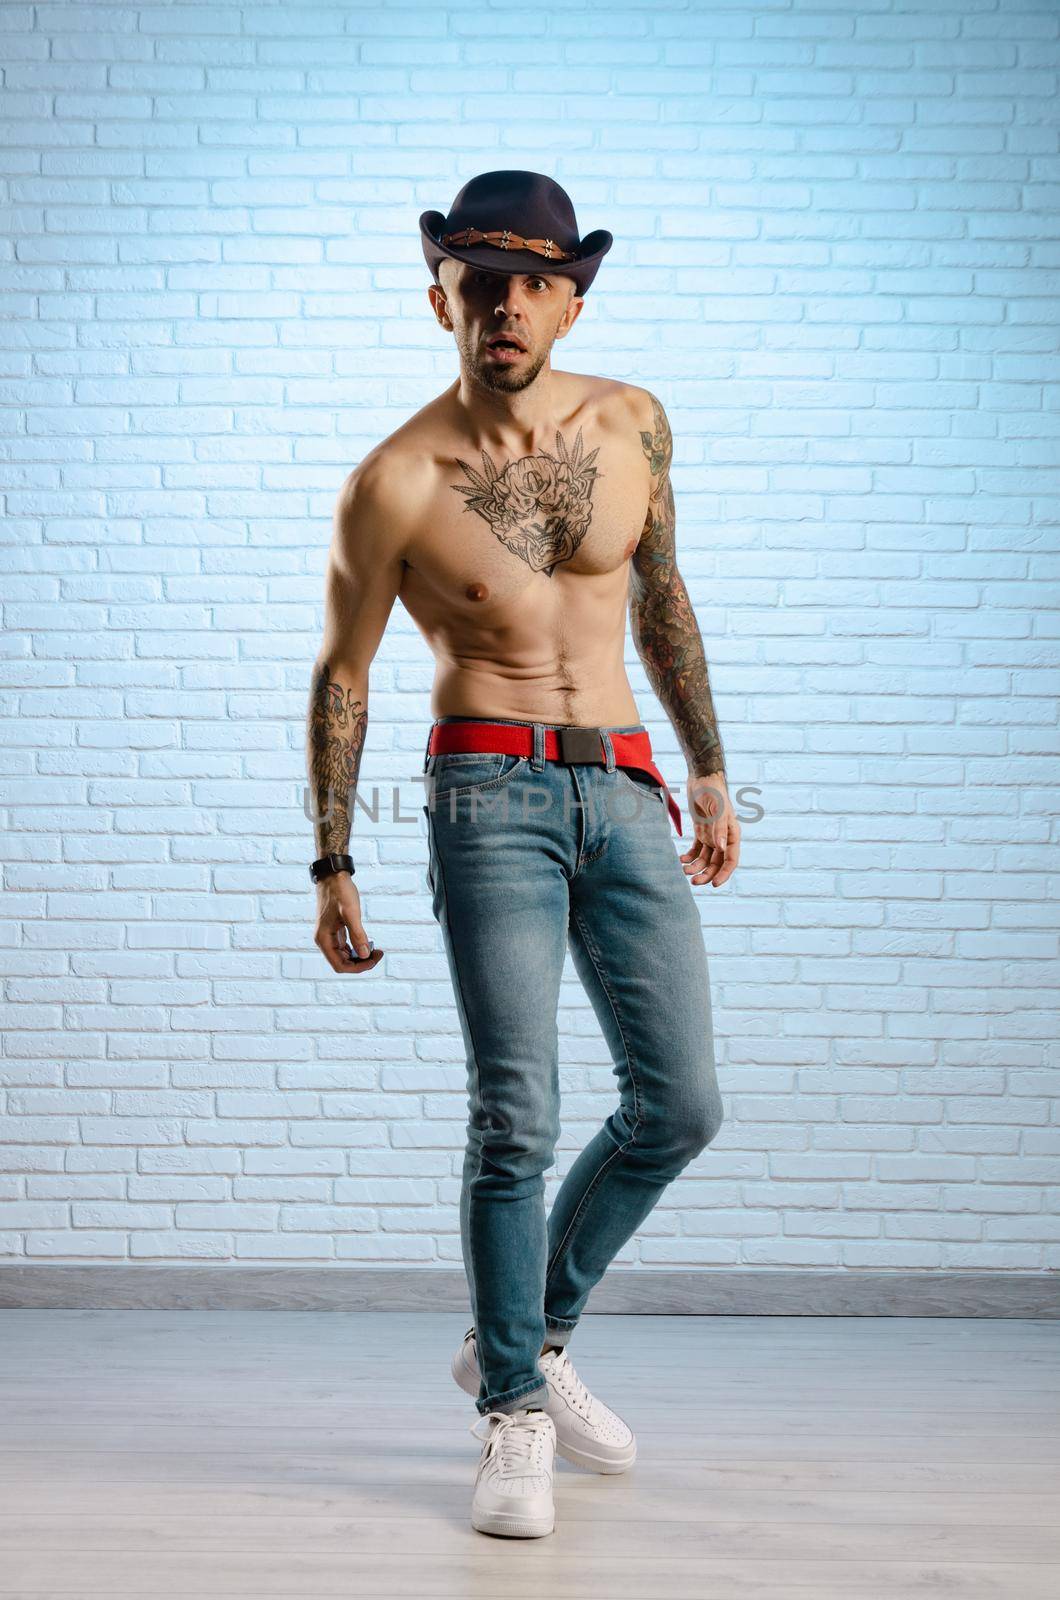 the fashionable slim guy with a bare torso in tattoos, jeans and a cowboy hat